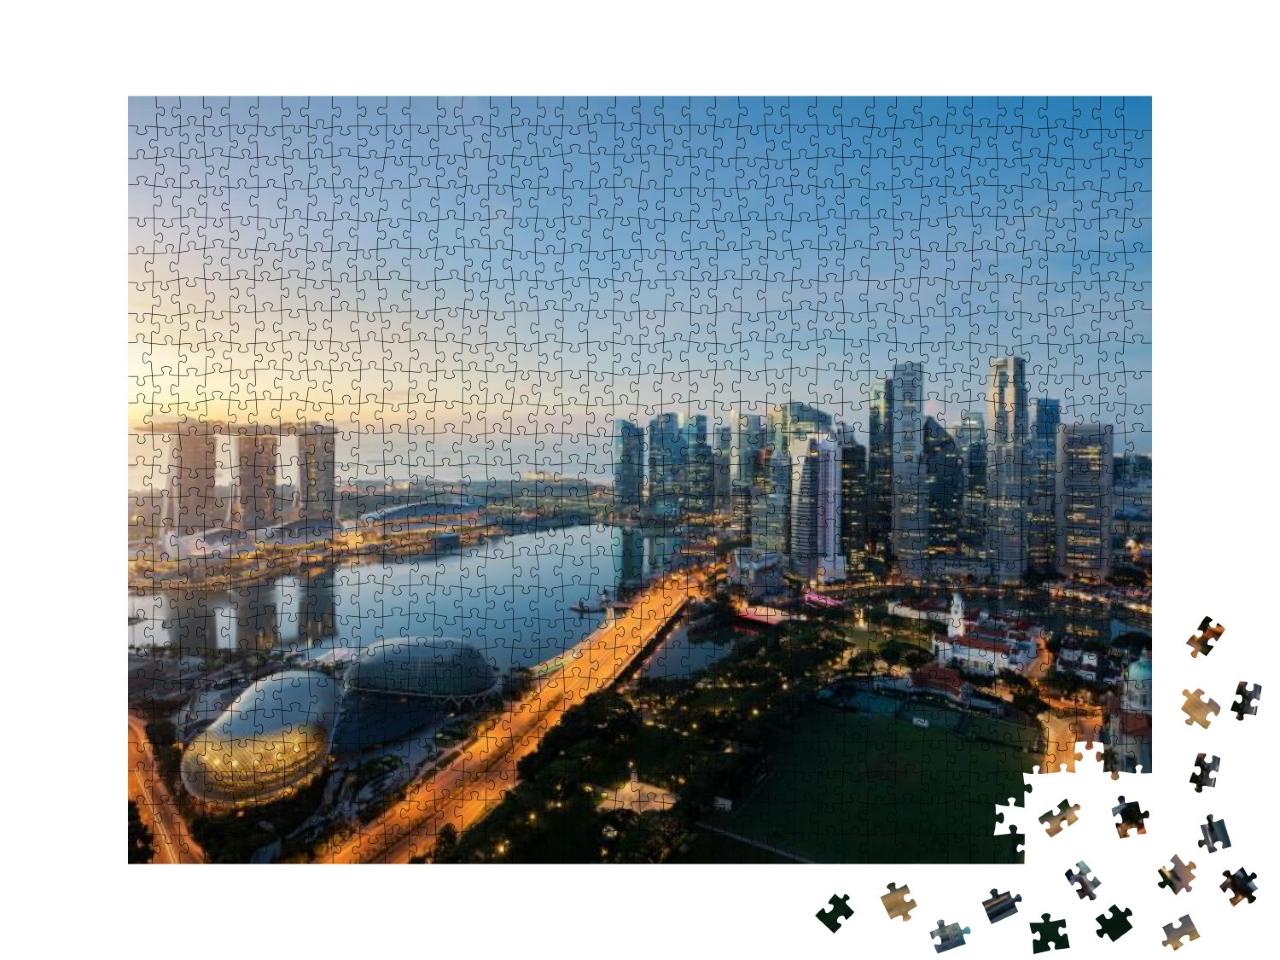 Aerial View of Singapore Business District & City At Twil... Jigsaw Puzzle with 1000 pieces